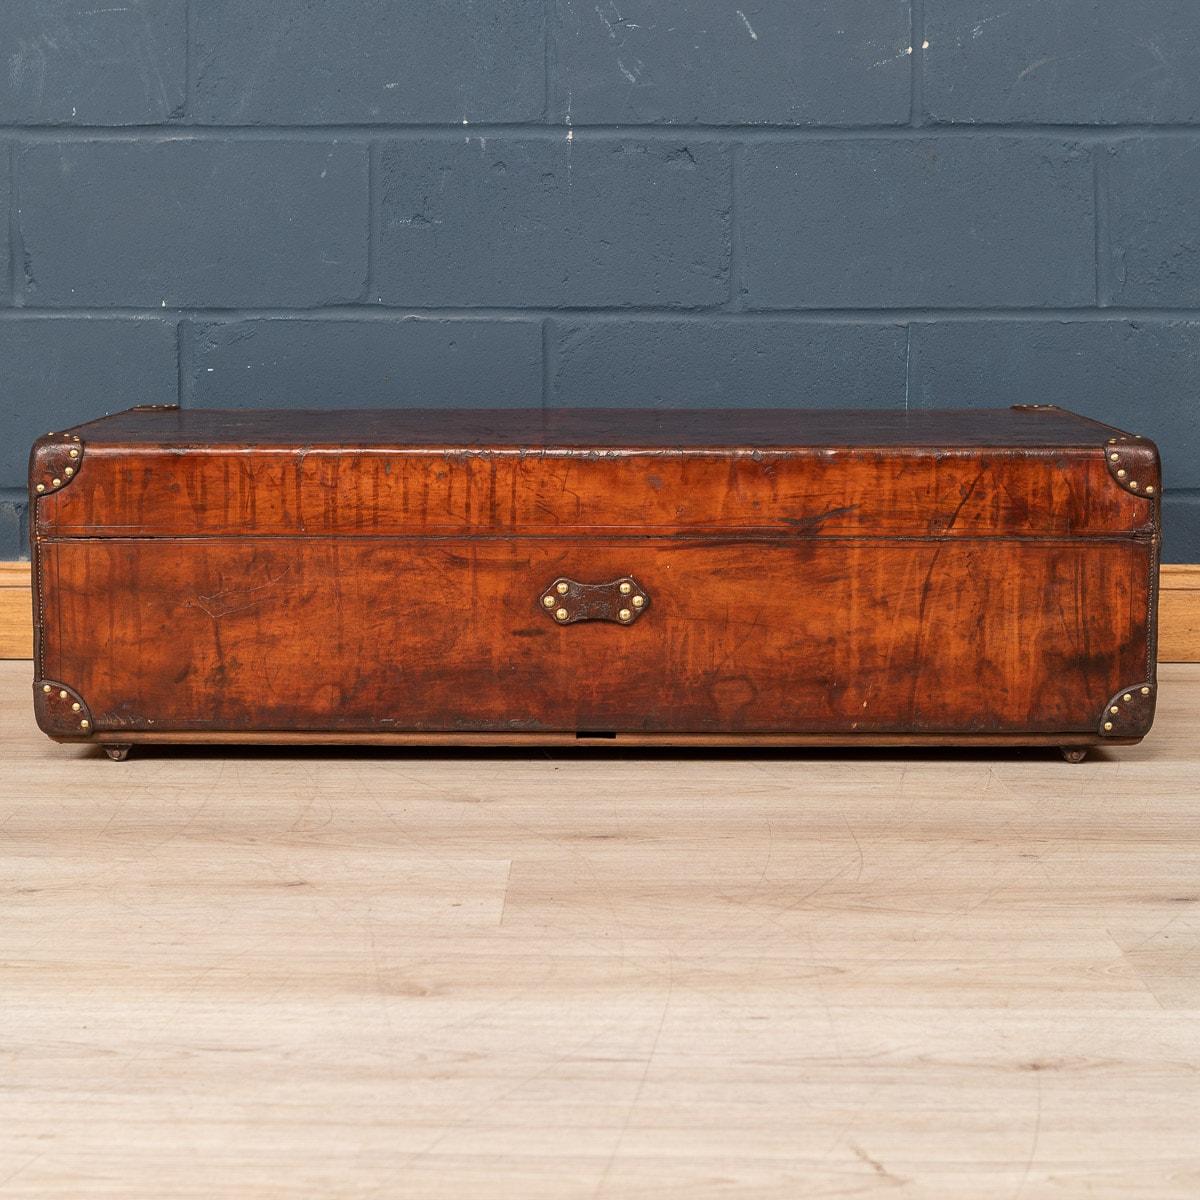 20th Century Louis Vuitton Cabin Trunk In Natural Cow Hide, Paris, c.1910 In Good Condition For Sale In Royal Tunbridge Wells, Kent